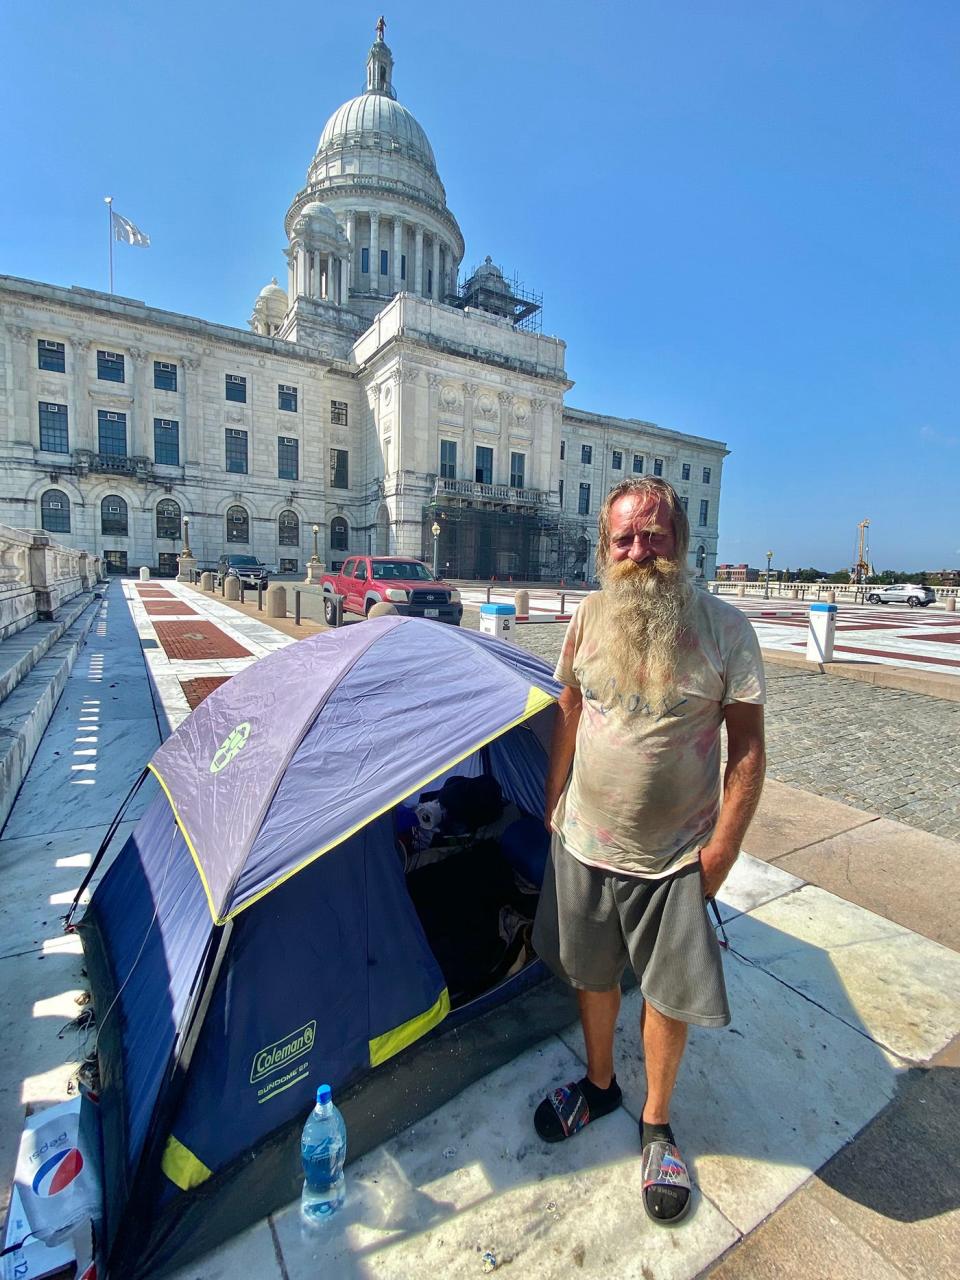 Just over a year ago, Neugent was among the first to make a statement about the need for housing by camping out in a tent on the State House steps. He stayed for weeks, and eventually made his home within sight of the State House.